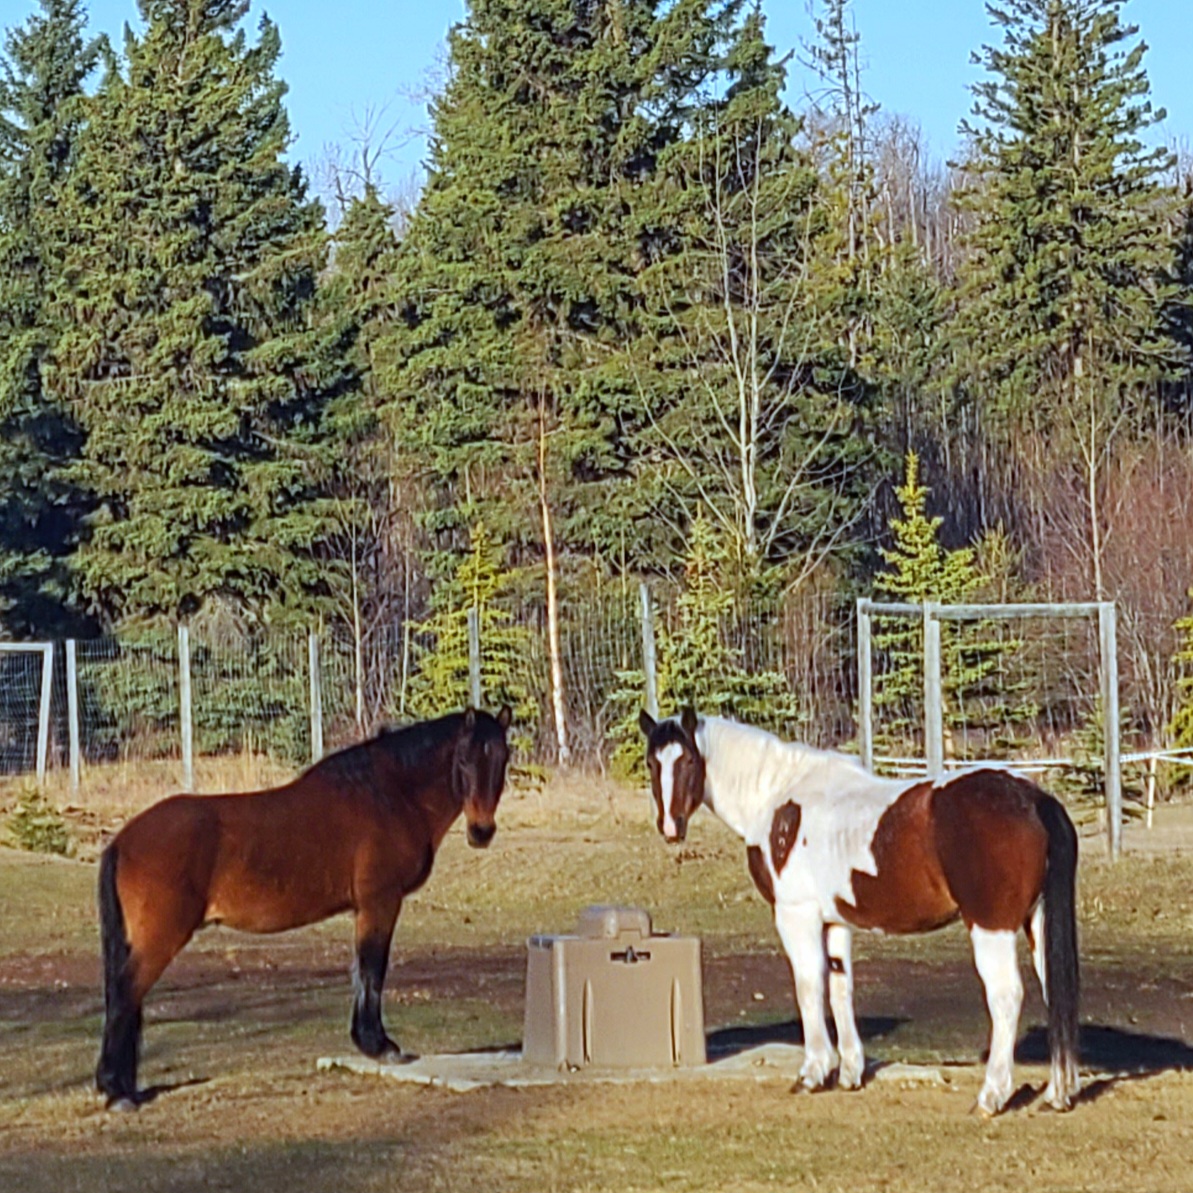 Wildie News!  Wildie Zeus and Bailey hang out at the waterer.  This boy took years to REALLY socially integrate with the herd.  Even at his age, we still see huge changes in his pride and confidence.  #wildiezeus #zeus #wildhorses #wildhorsesofalberta #painthorse